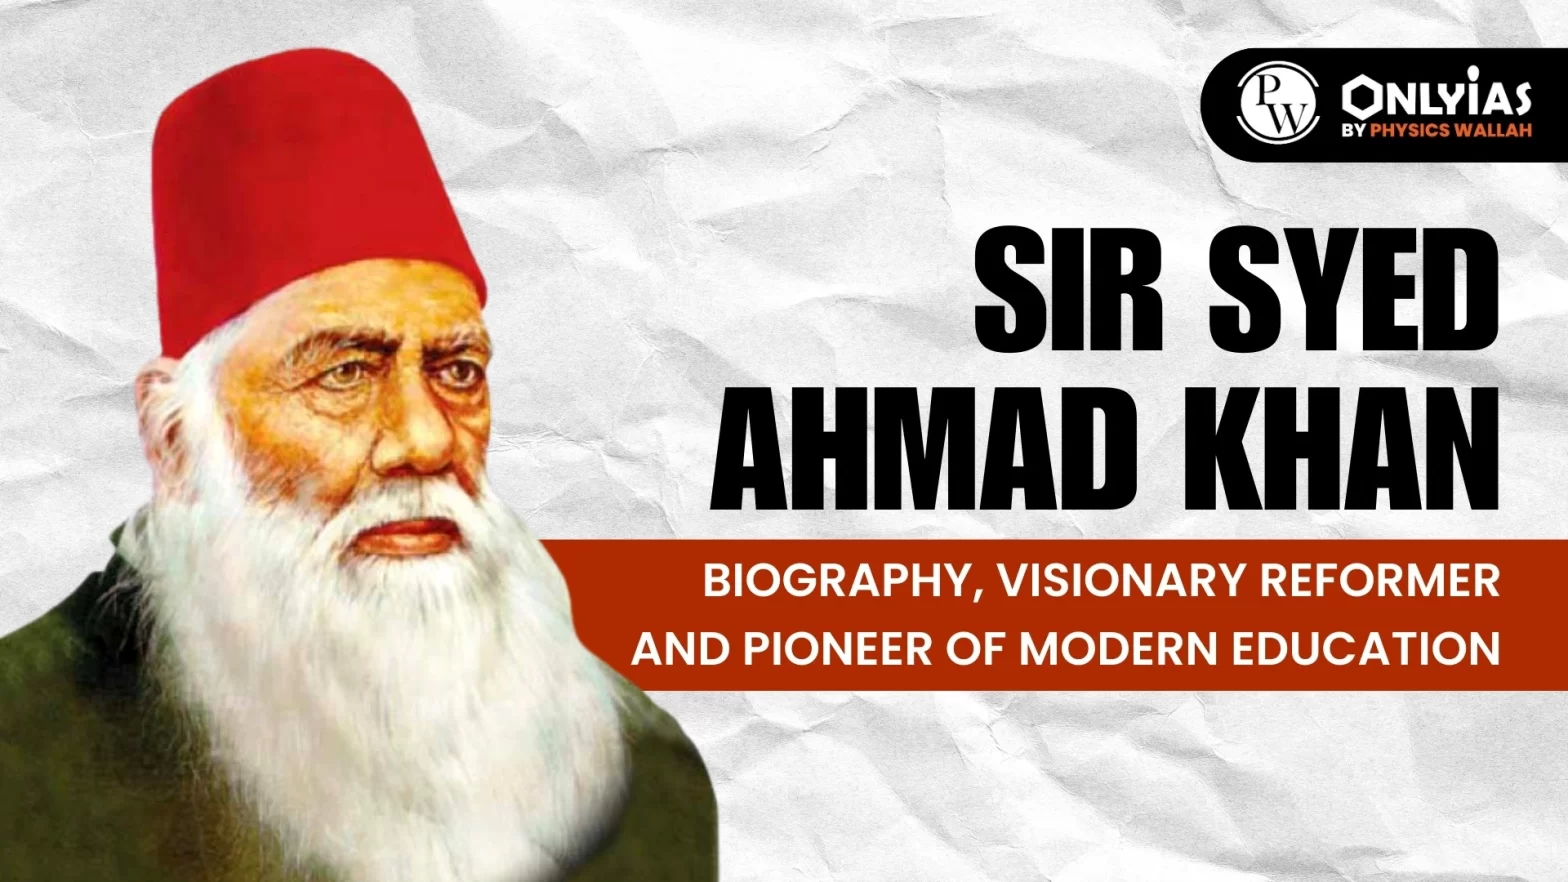 Sir Syed Ahmad Khan: Biography, Visionary Reformer and Pioneer of Modern Education